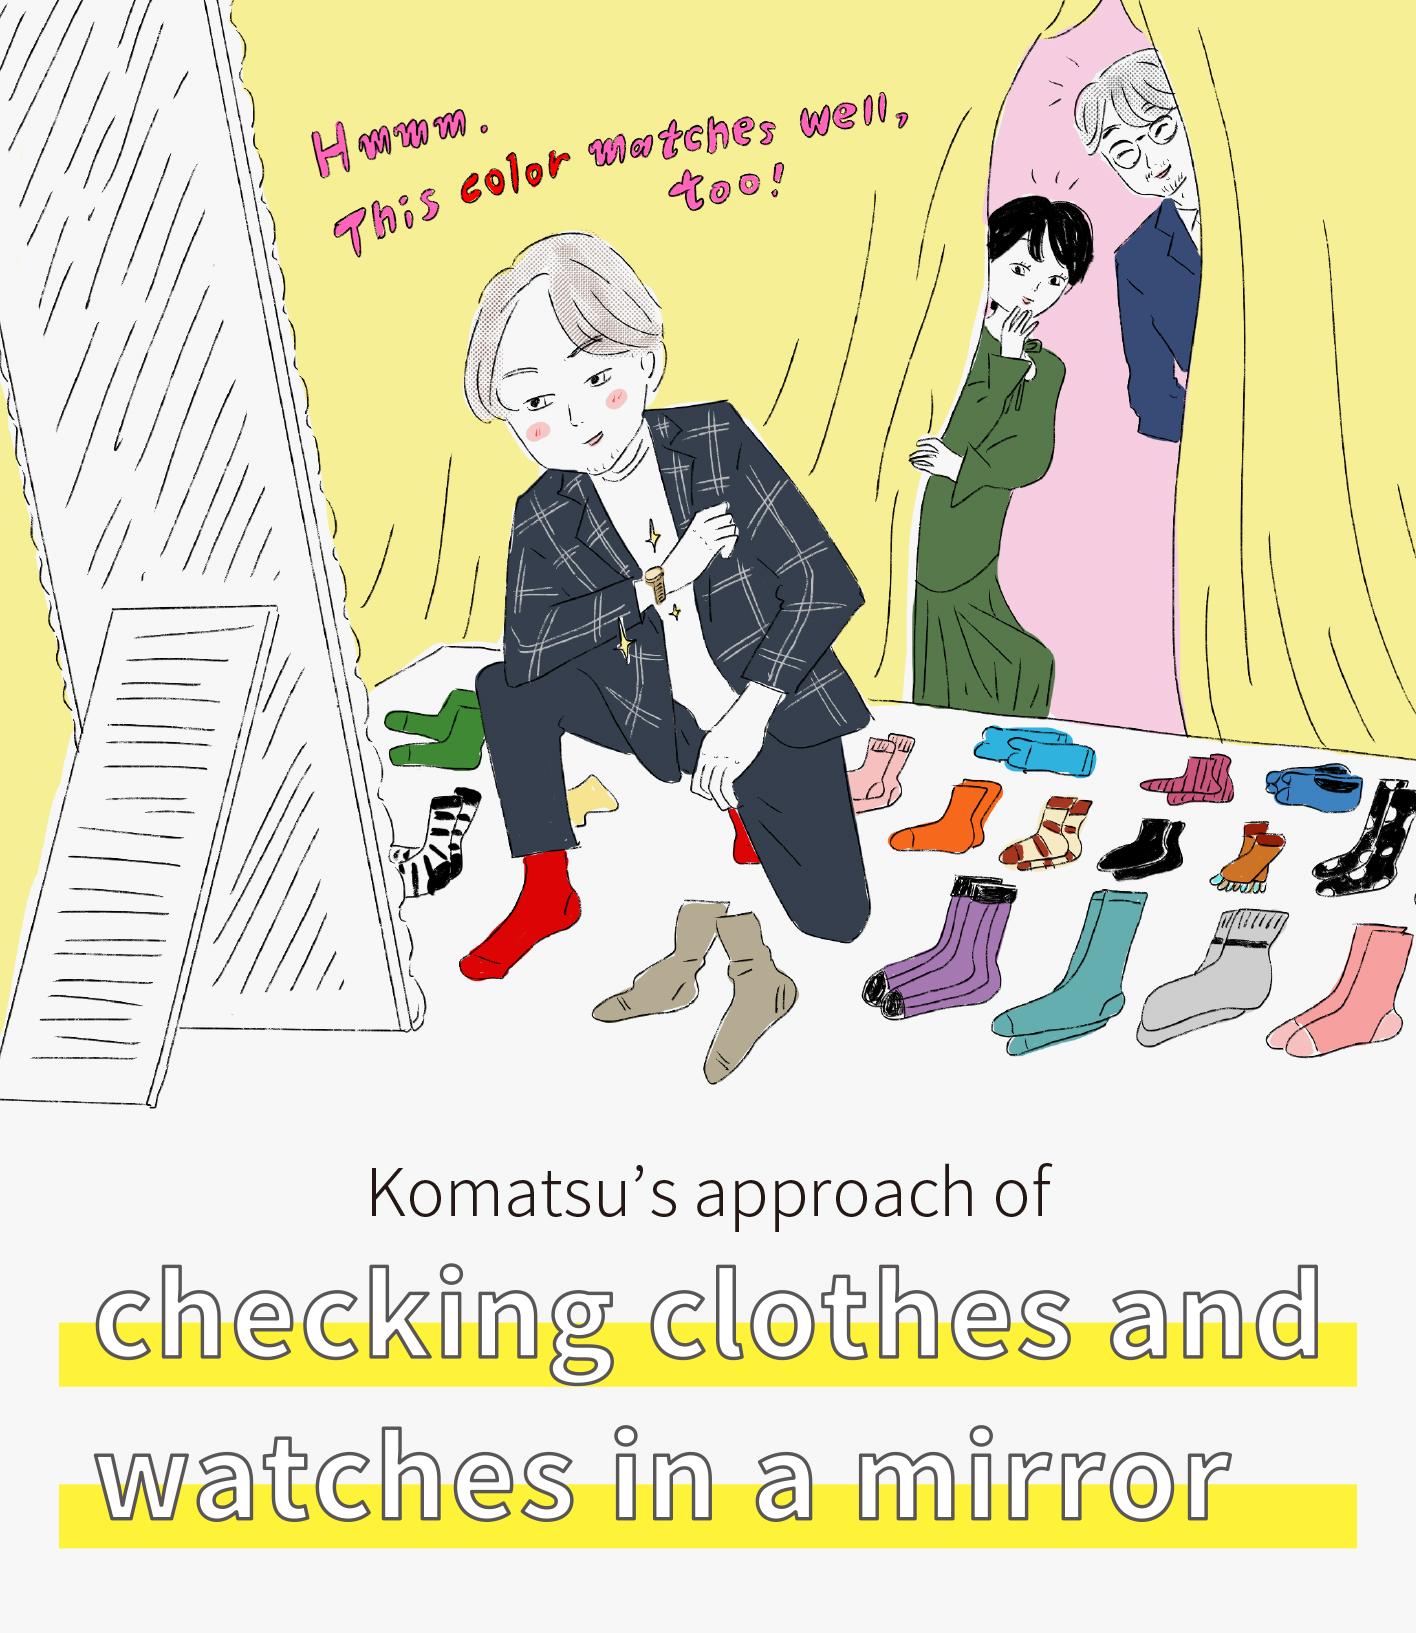 Hmmm. This color matches well, too! Komatsu’s approach of checking clothes and watches in a mirror